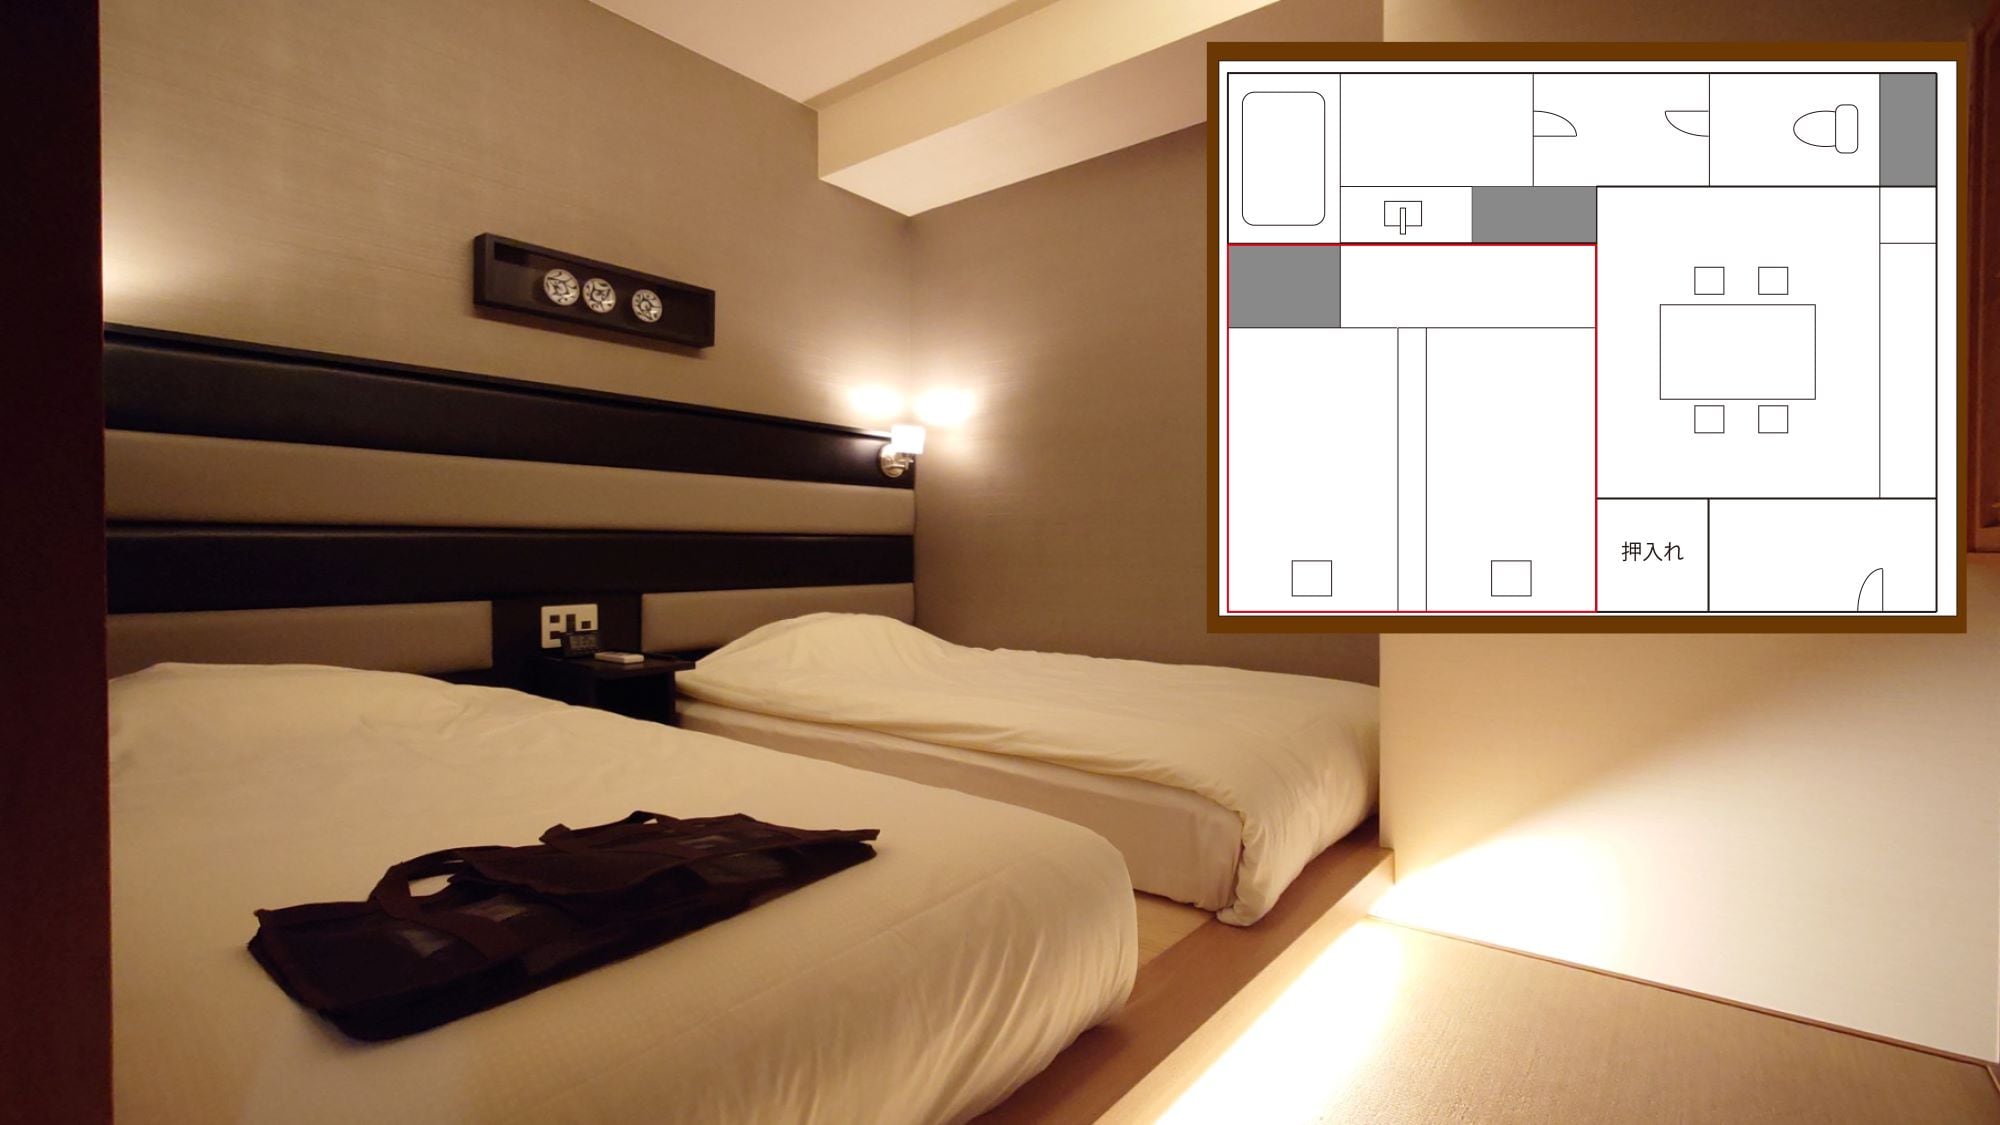 Japanese-Western style room layout (bed)